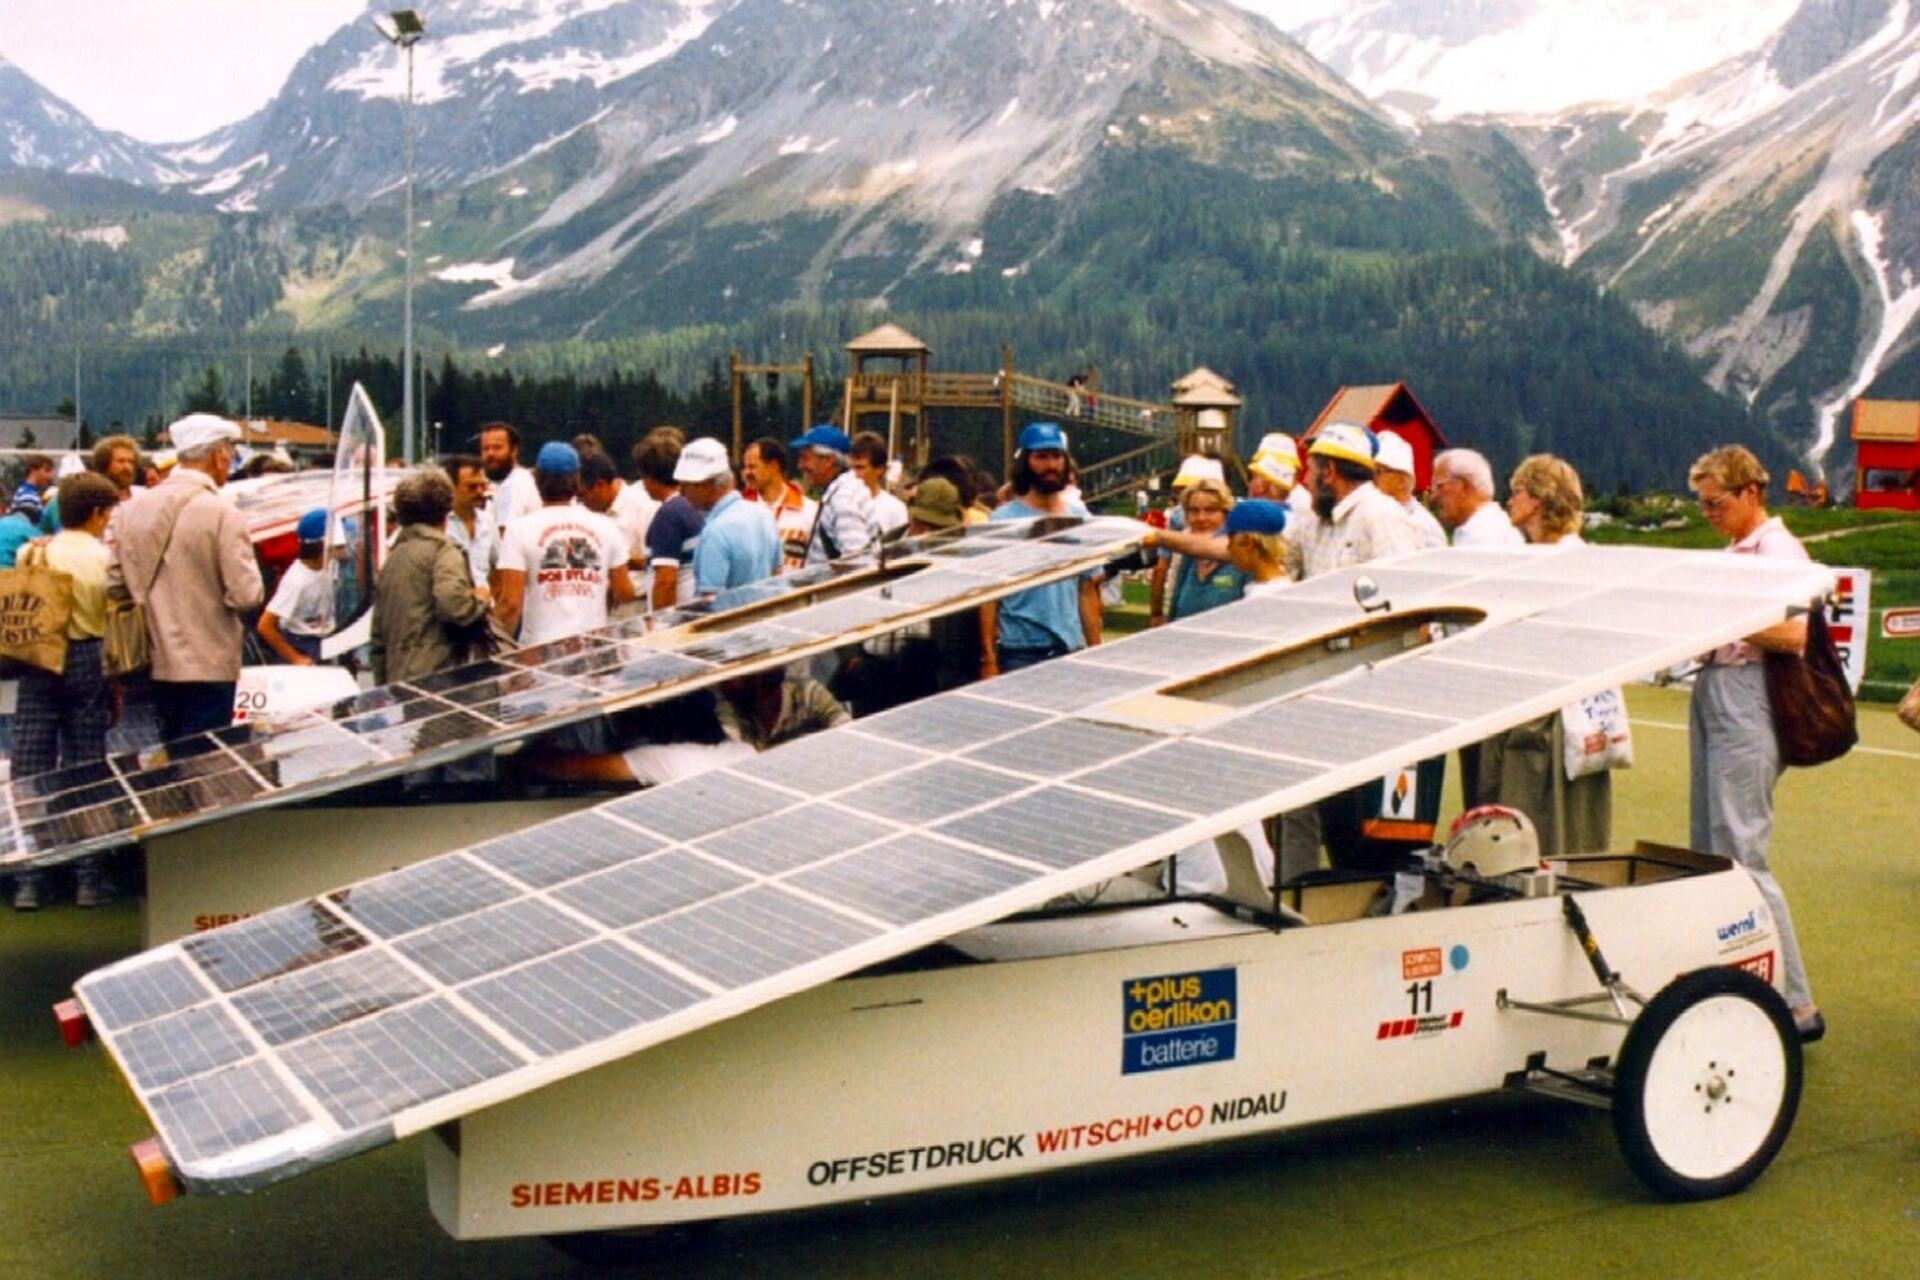 Michèle Kottelat: The “Tour de Sol” was the first rally for solar-powered vehicles